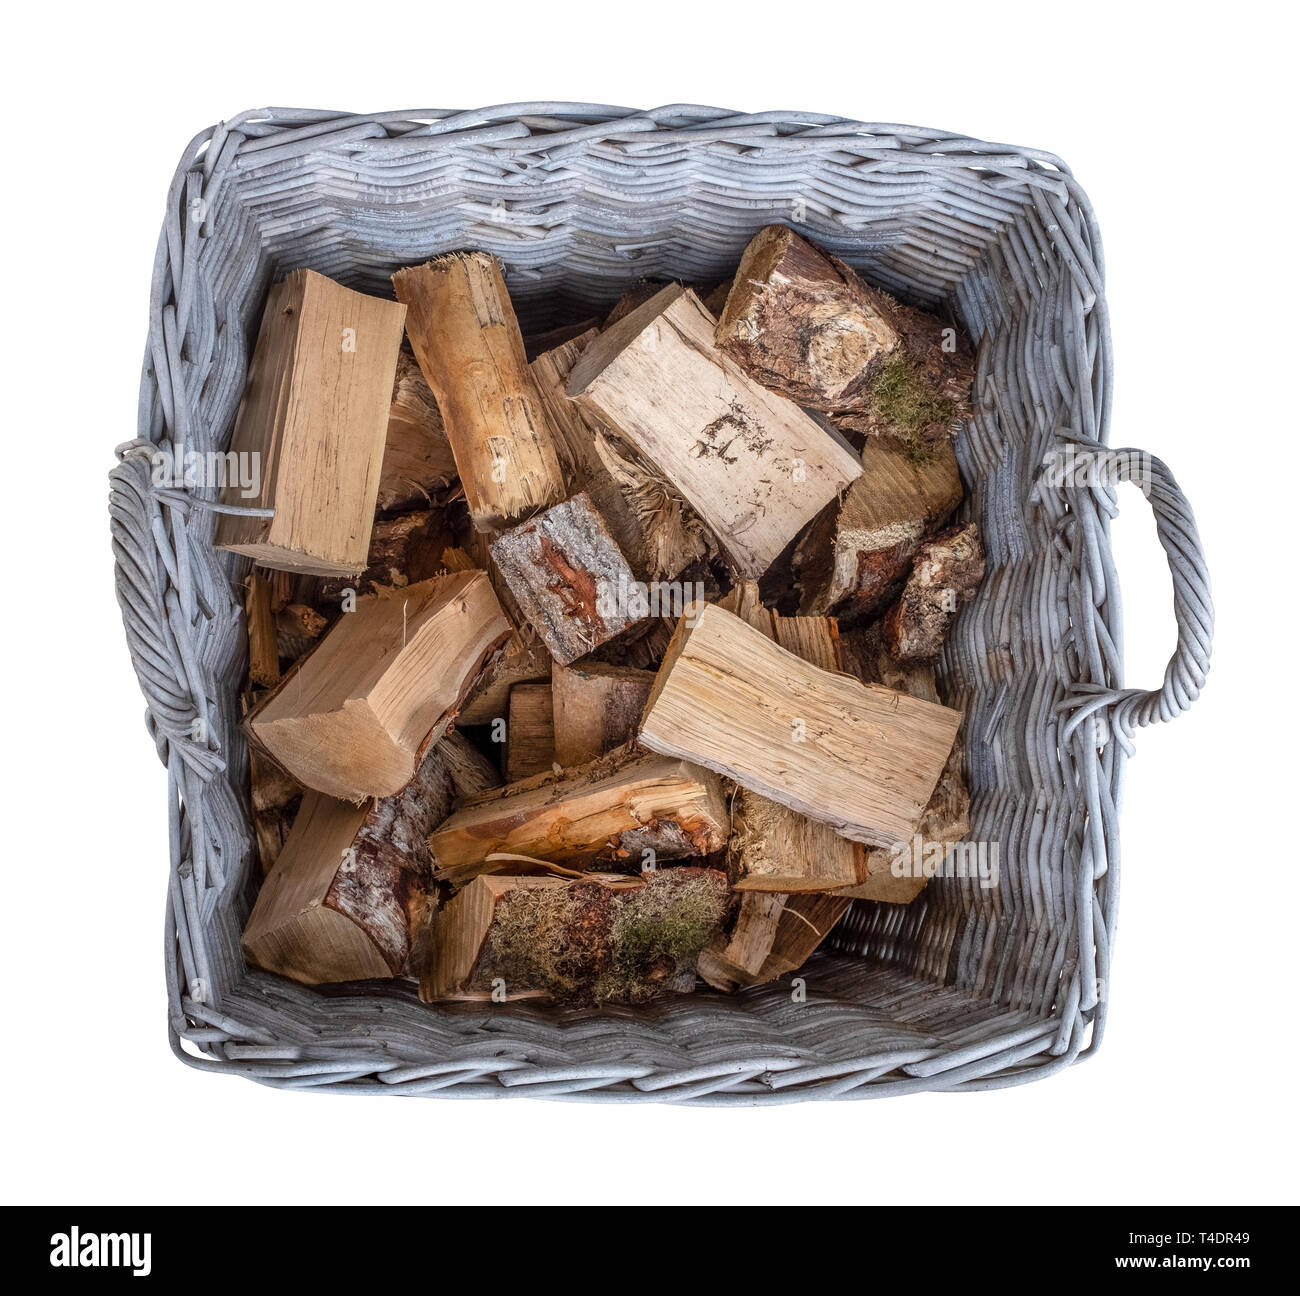 Isolated Old Basket of Cut Firewood In A Rustic Wicker Basket Stock Photo